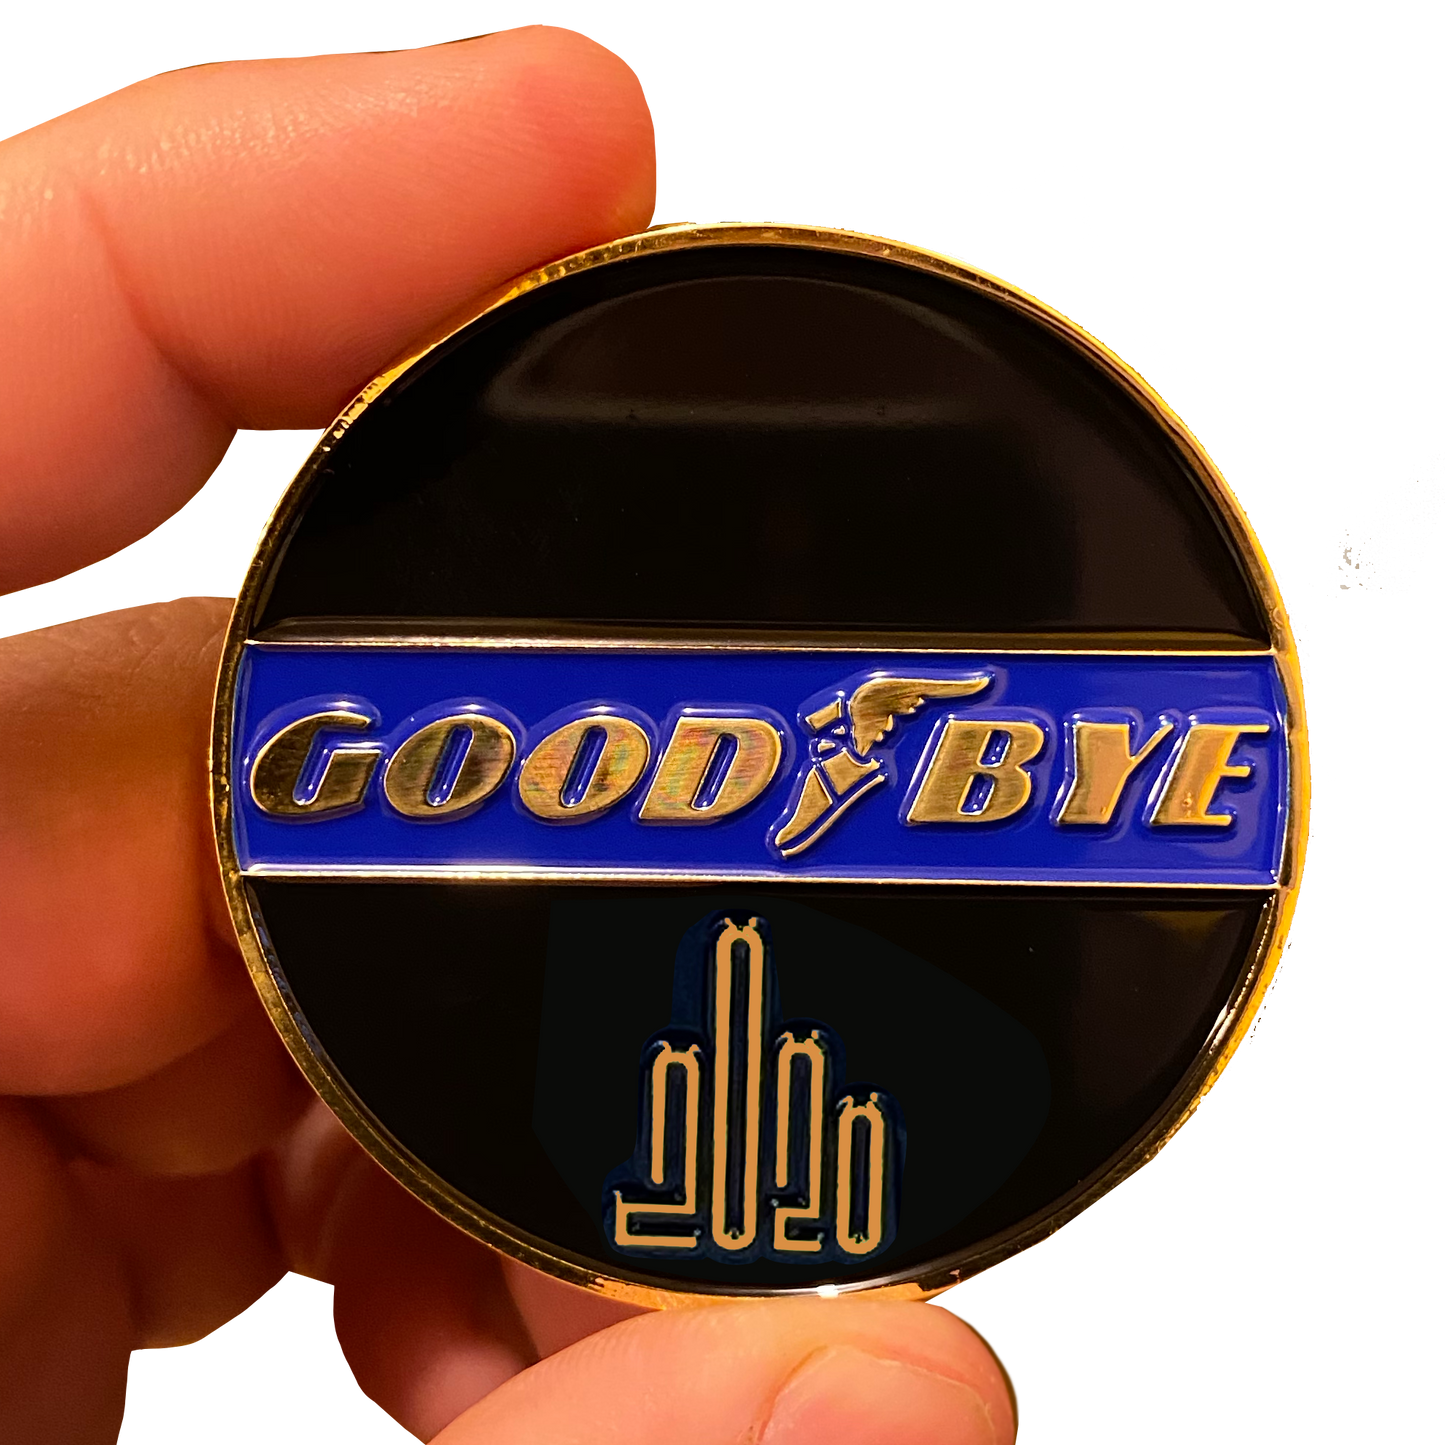 DL8-05 GOOD BYE 2020 Challenge Coin It was not a GoodYear Sorry We're Closed until 2021